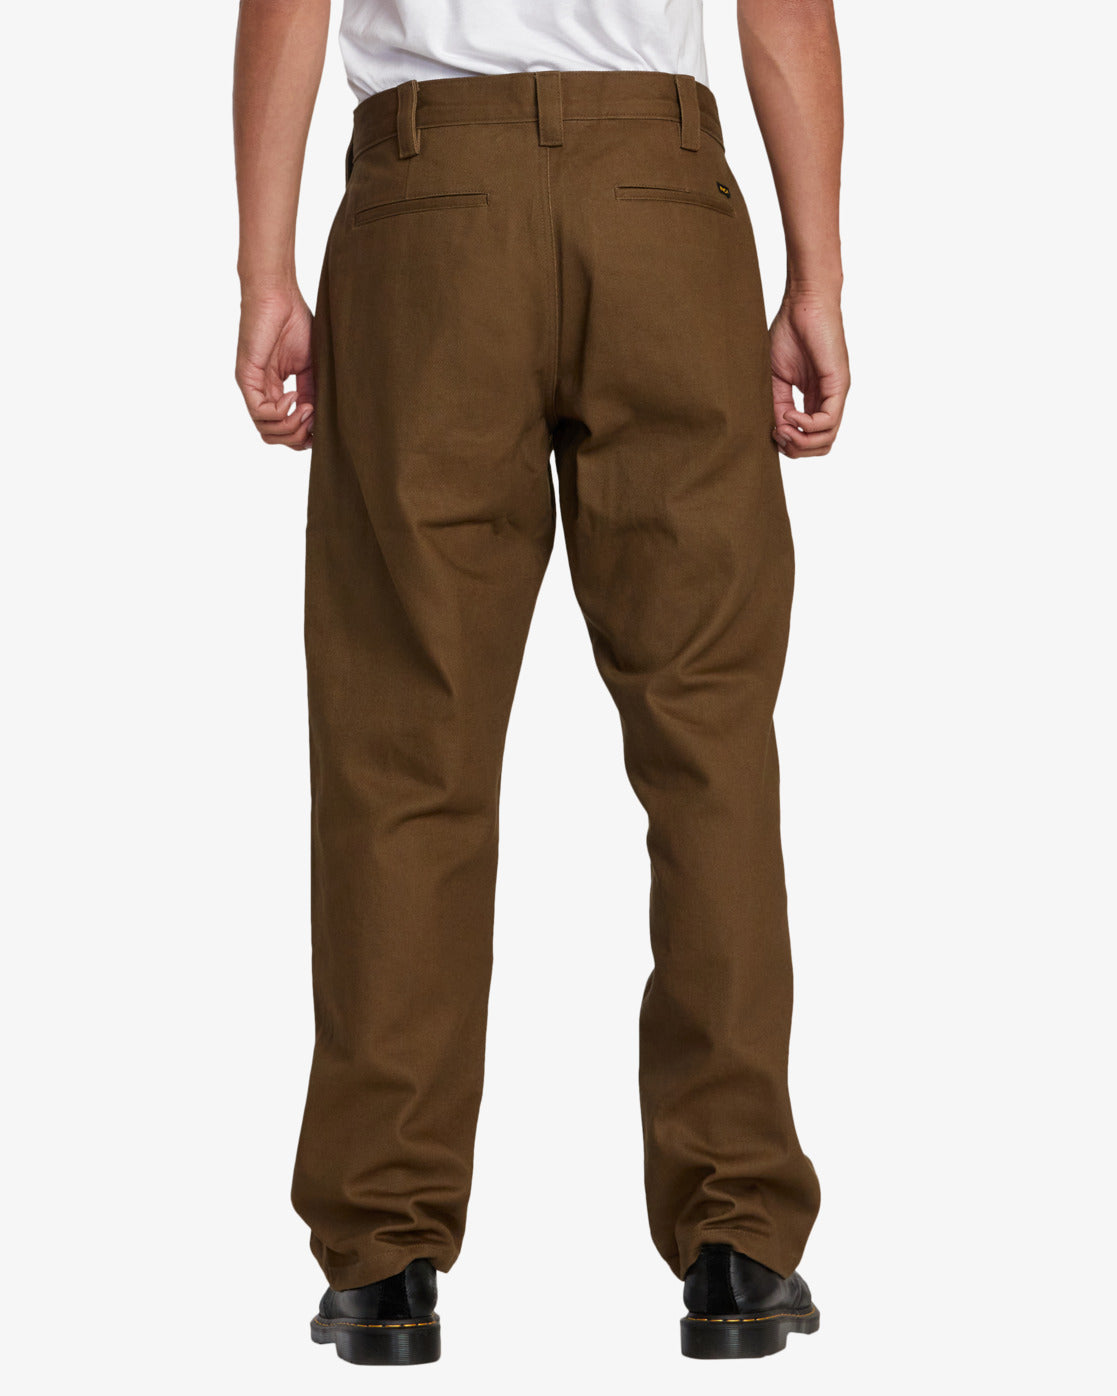 RVCA Americana Chino Pants in bombay brown from rear